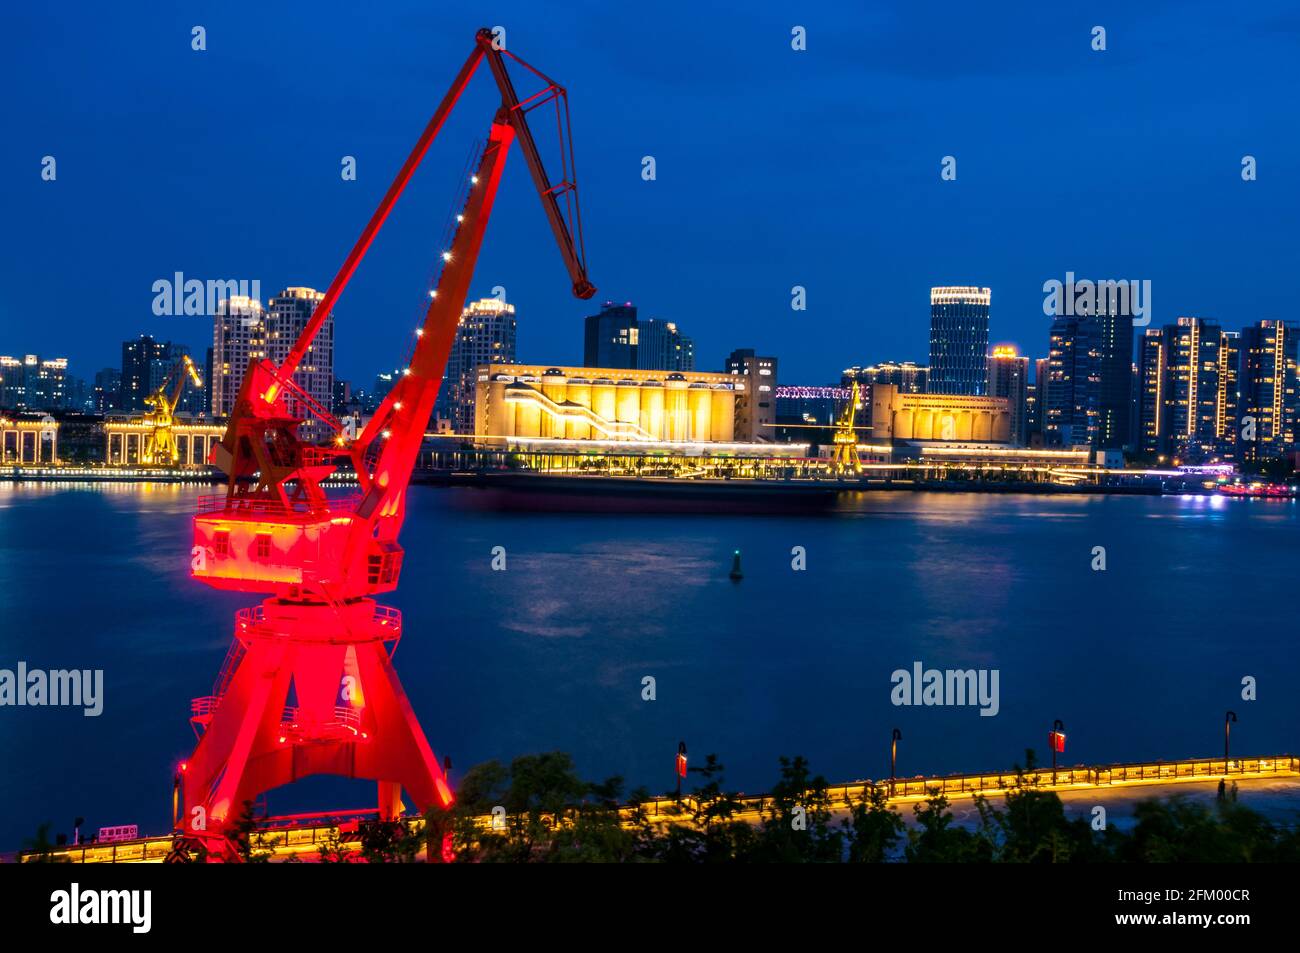 An old shipping crane in Yanpu District frames a cargo boat and buildings on the Pudong side of the Huangpu River, Shanghai, China. Stock Photo